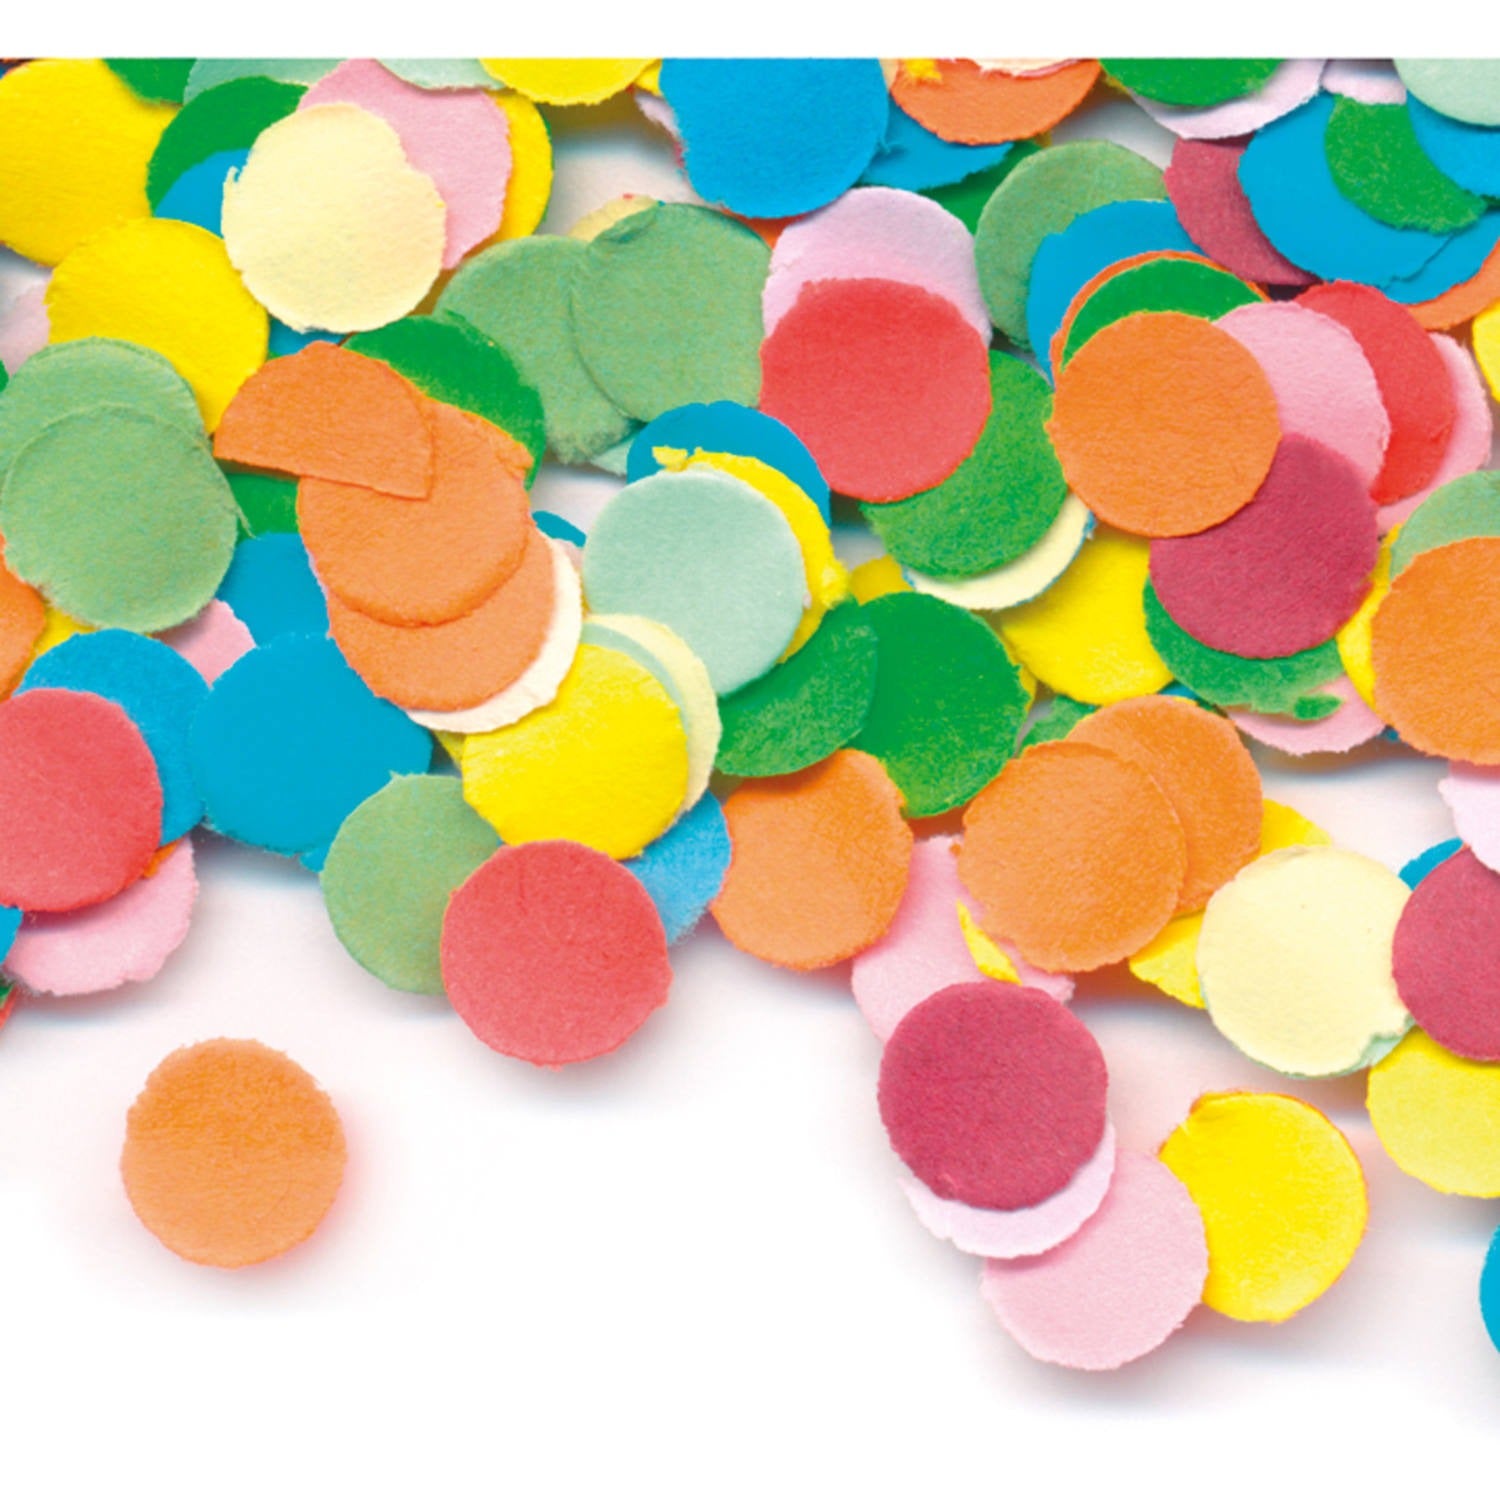 Confetti colored circles of different sizes